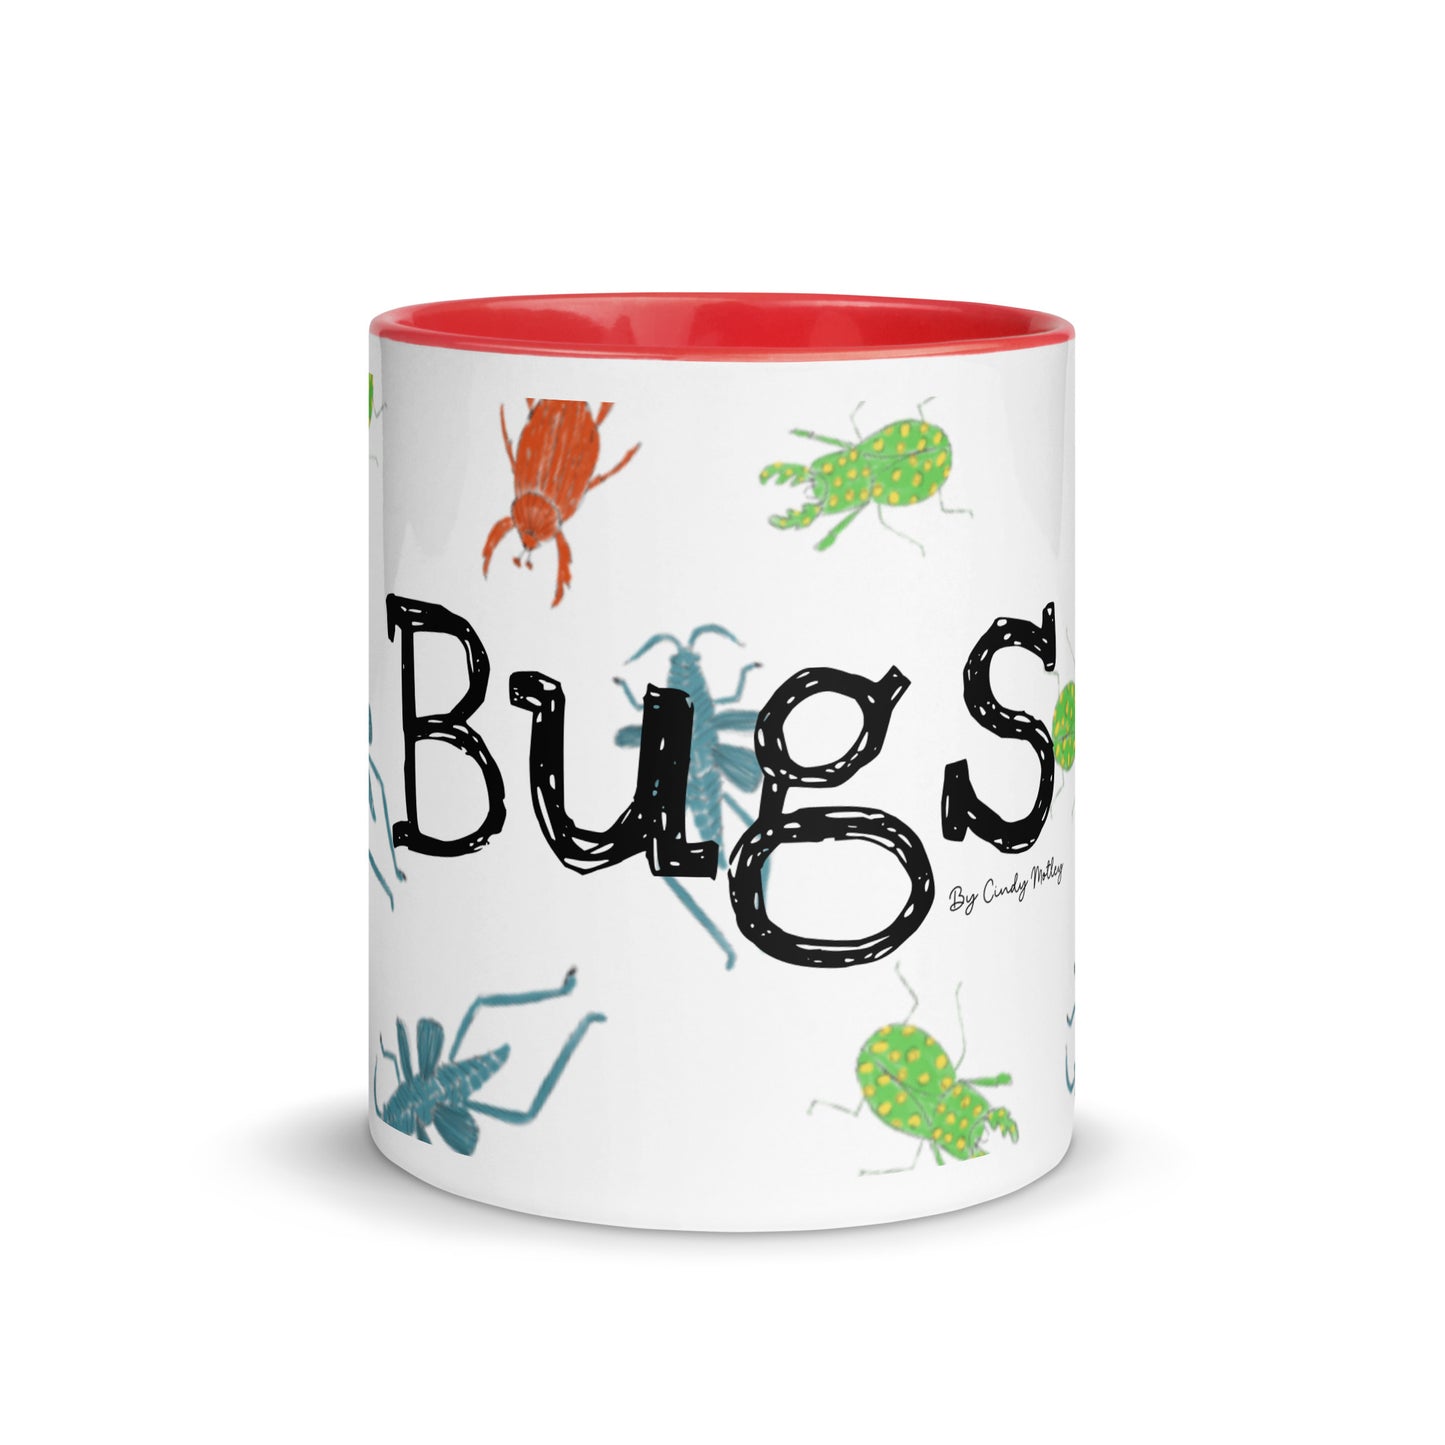 Bugs By Cindy Motley Mug with Color Inside